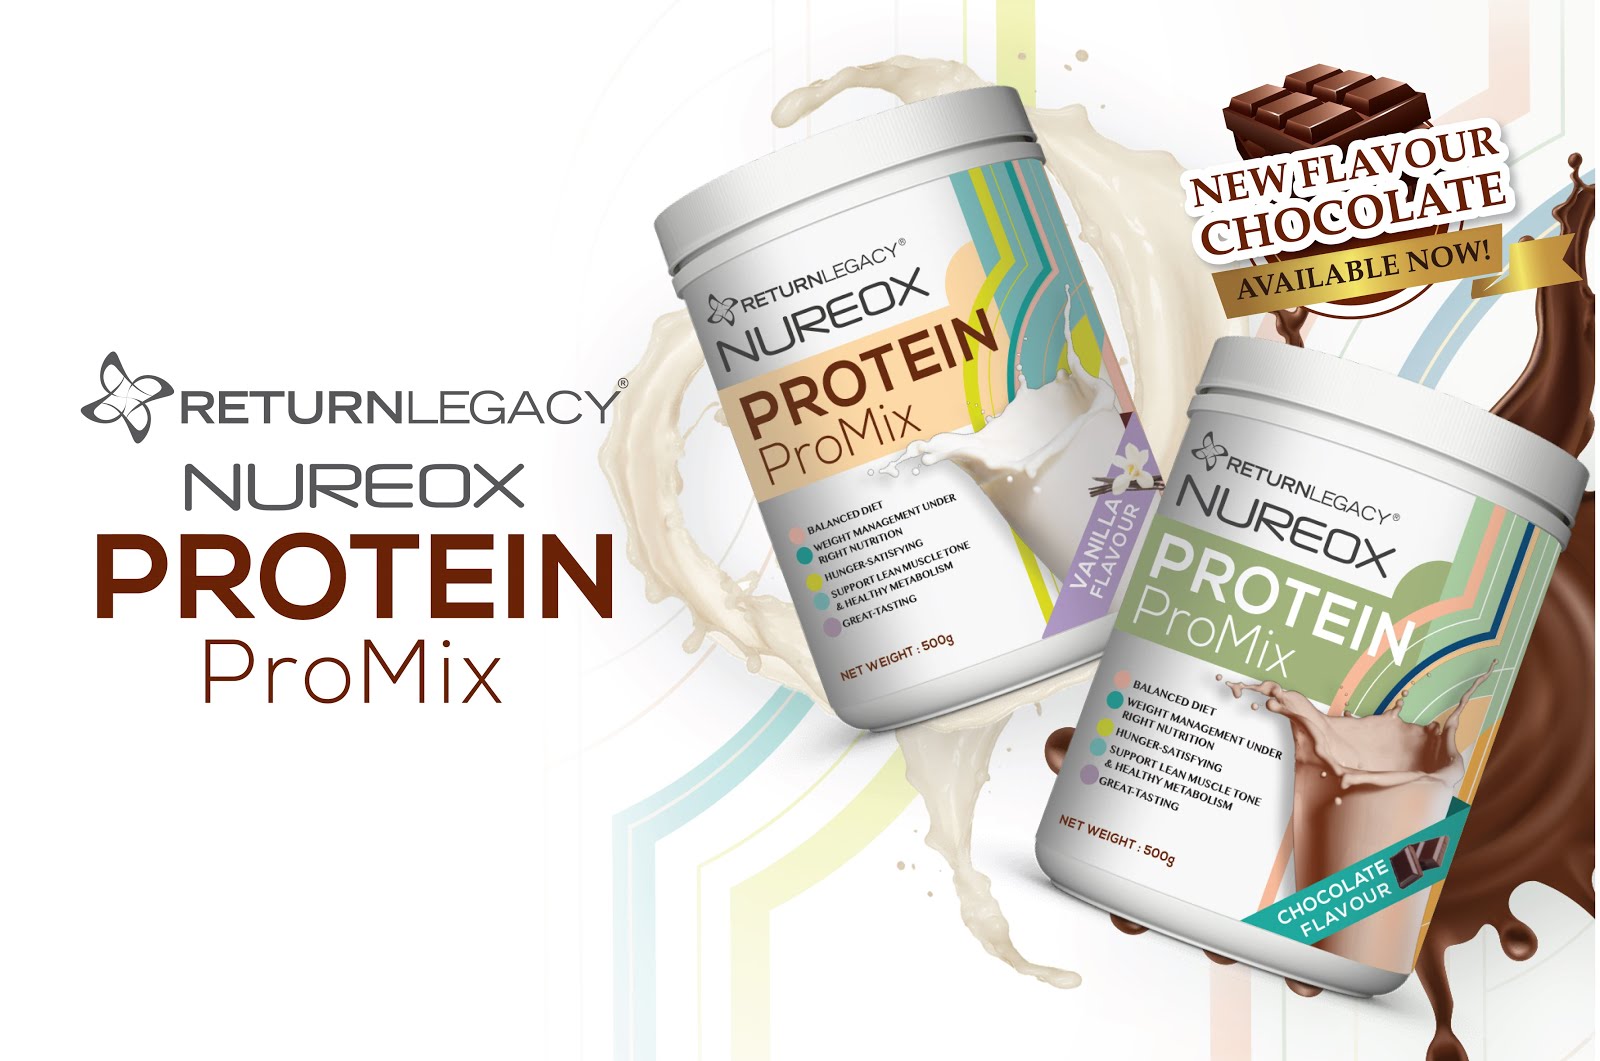 Nuteox Protein Promix